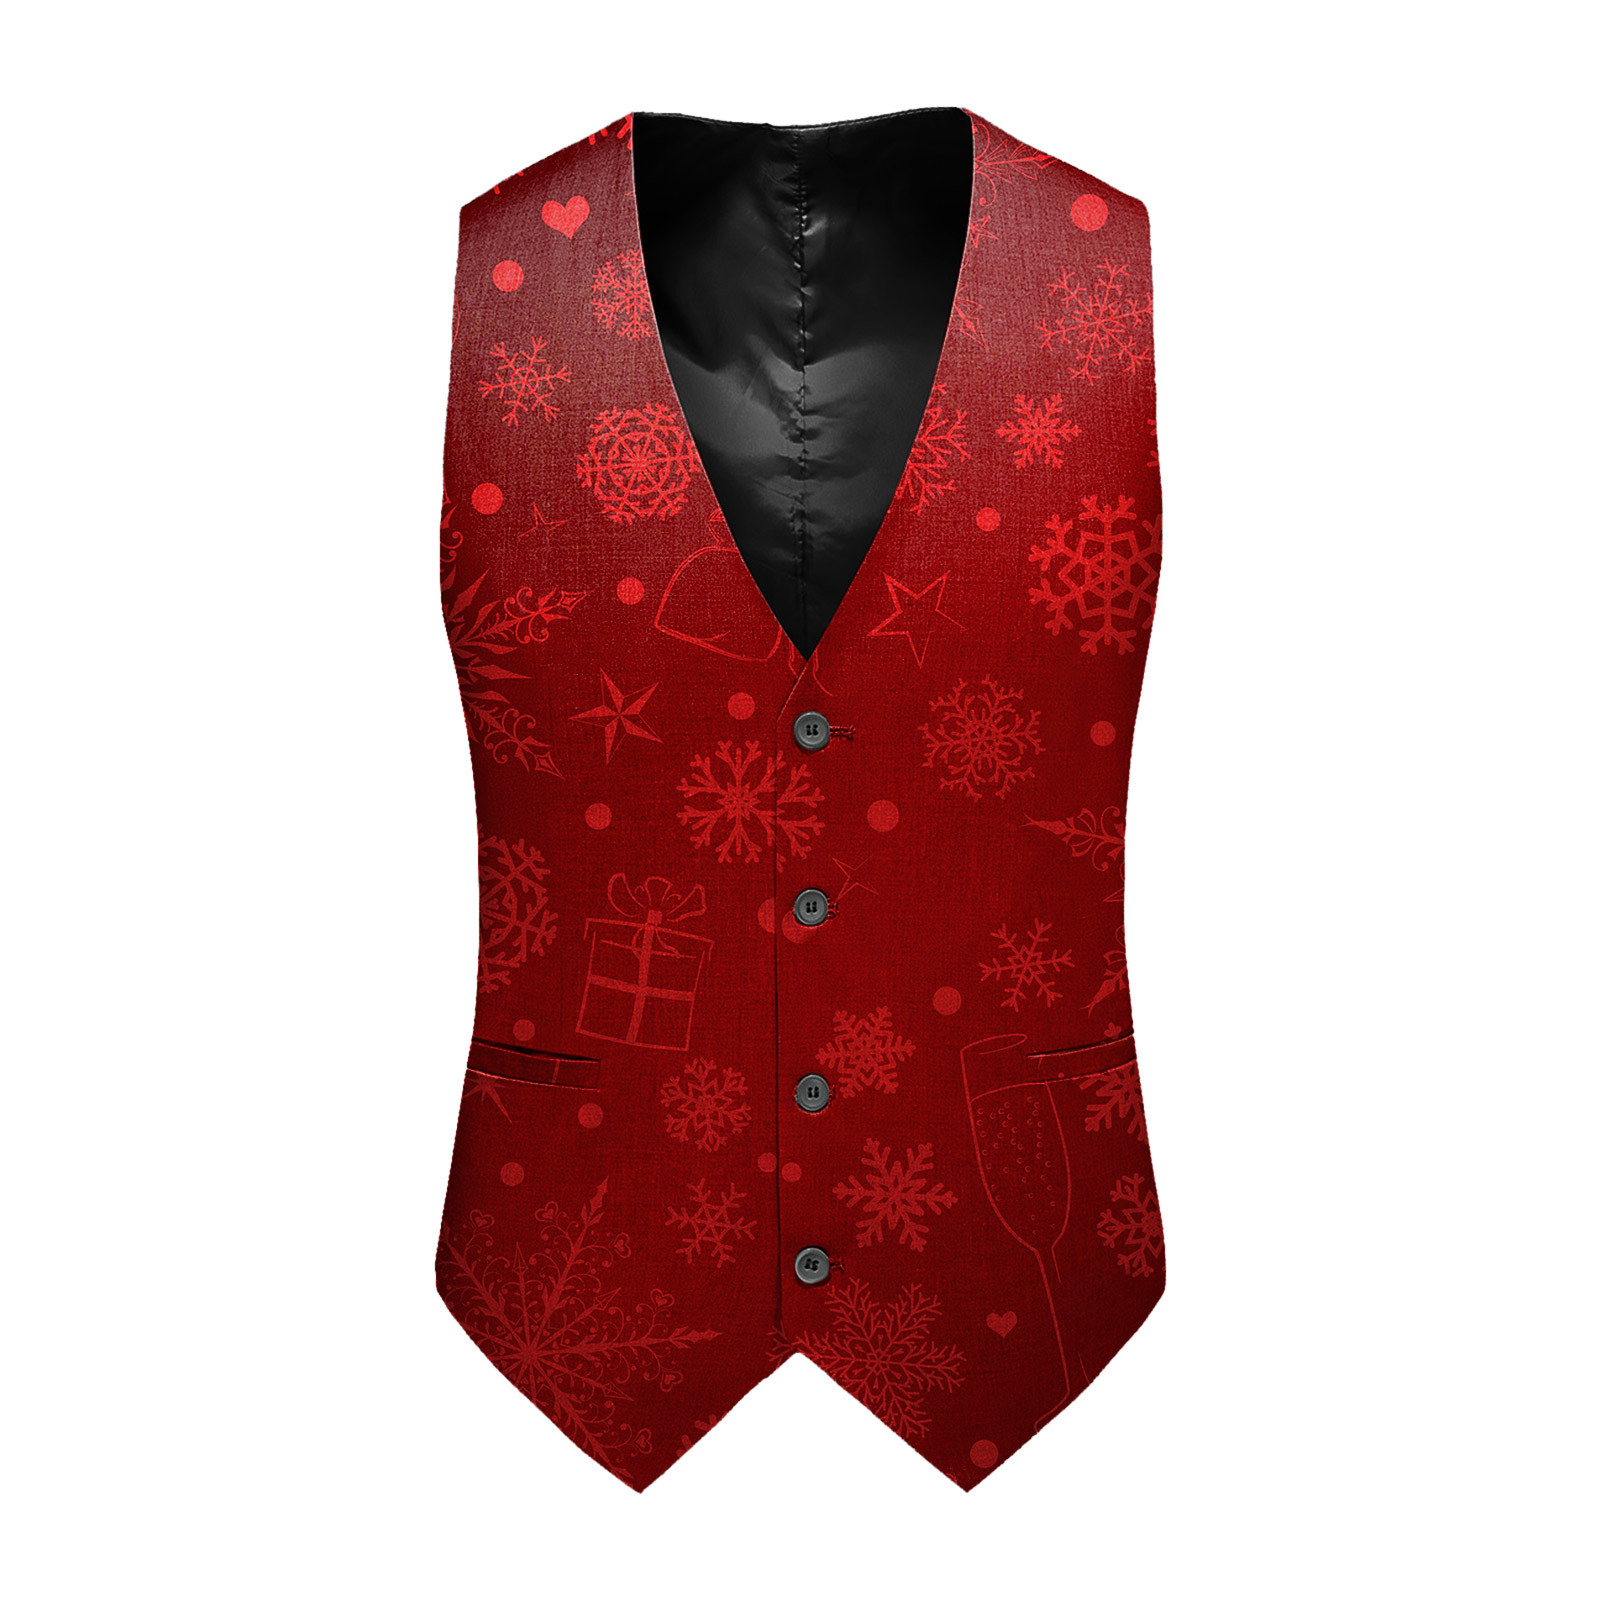 KEUSN Mens Christmas Vest with Snow/Christmas Tree Picture Red/Green ...